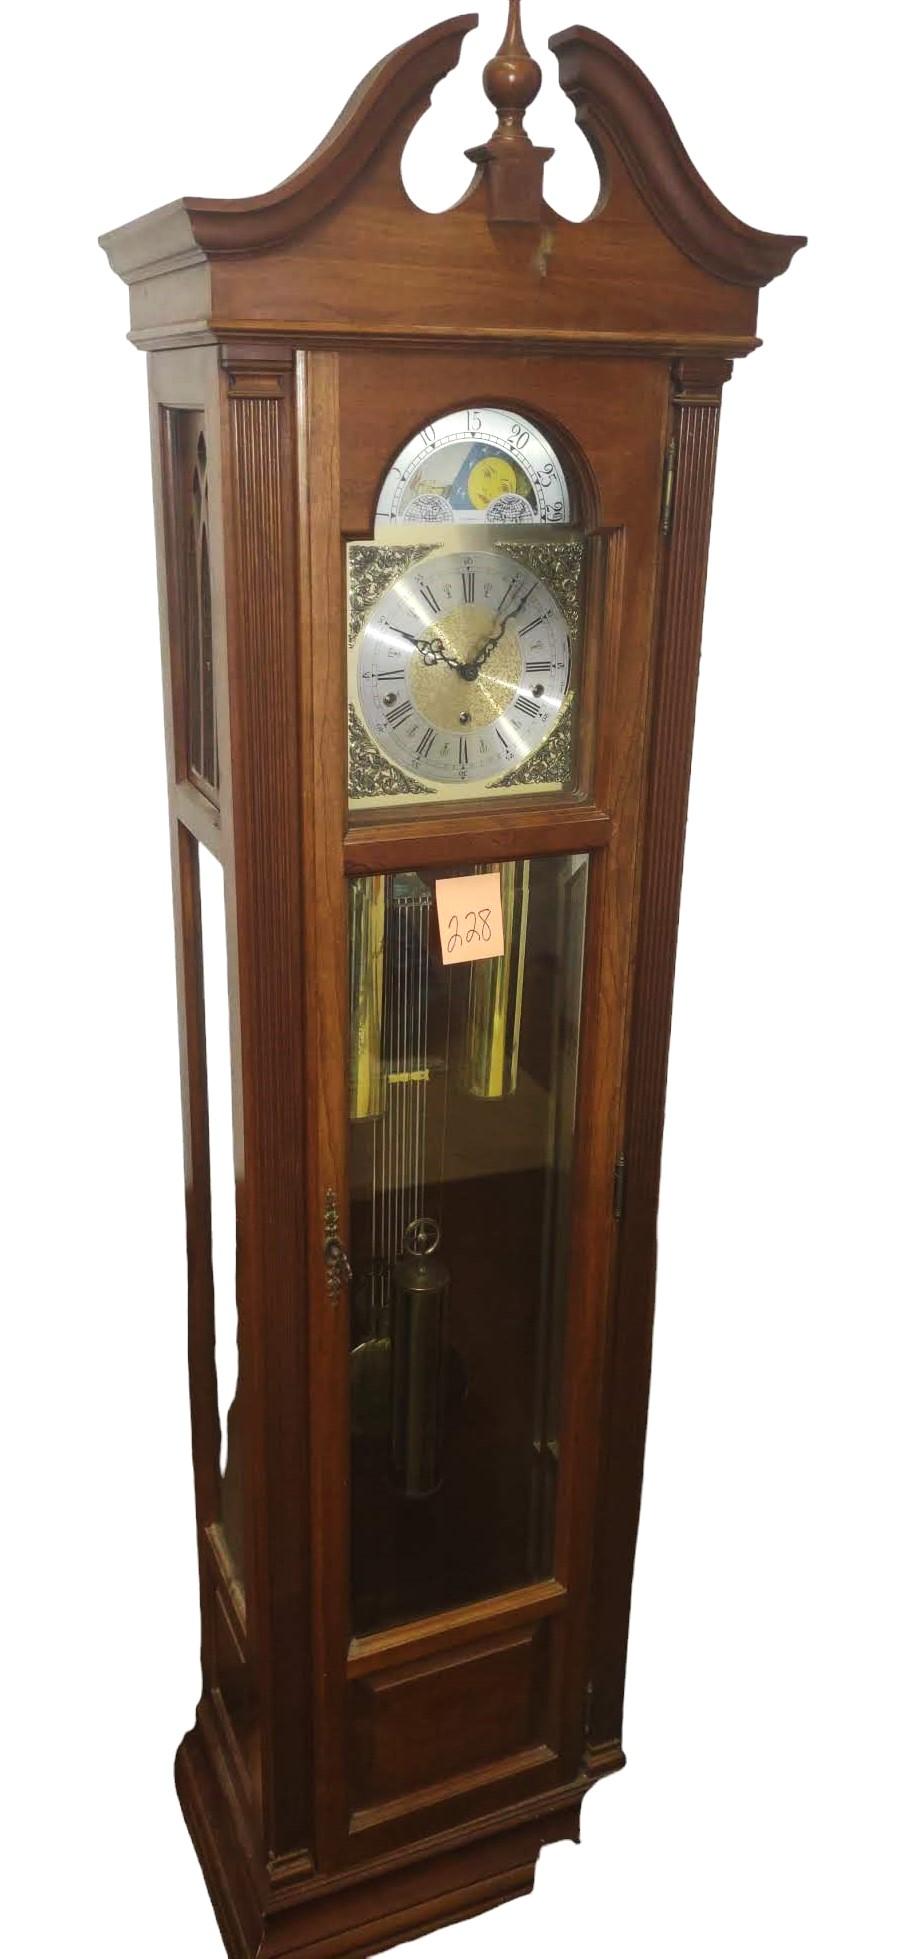 GRANDFATHER CLOCK (RUNS) - PICK UP ONLY